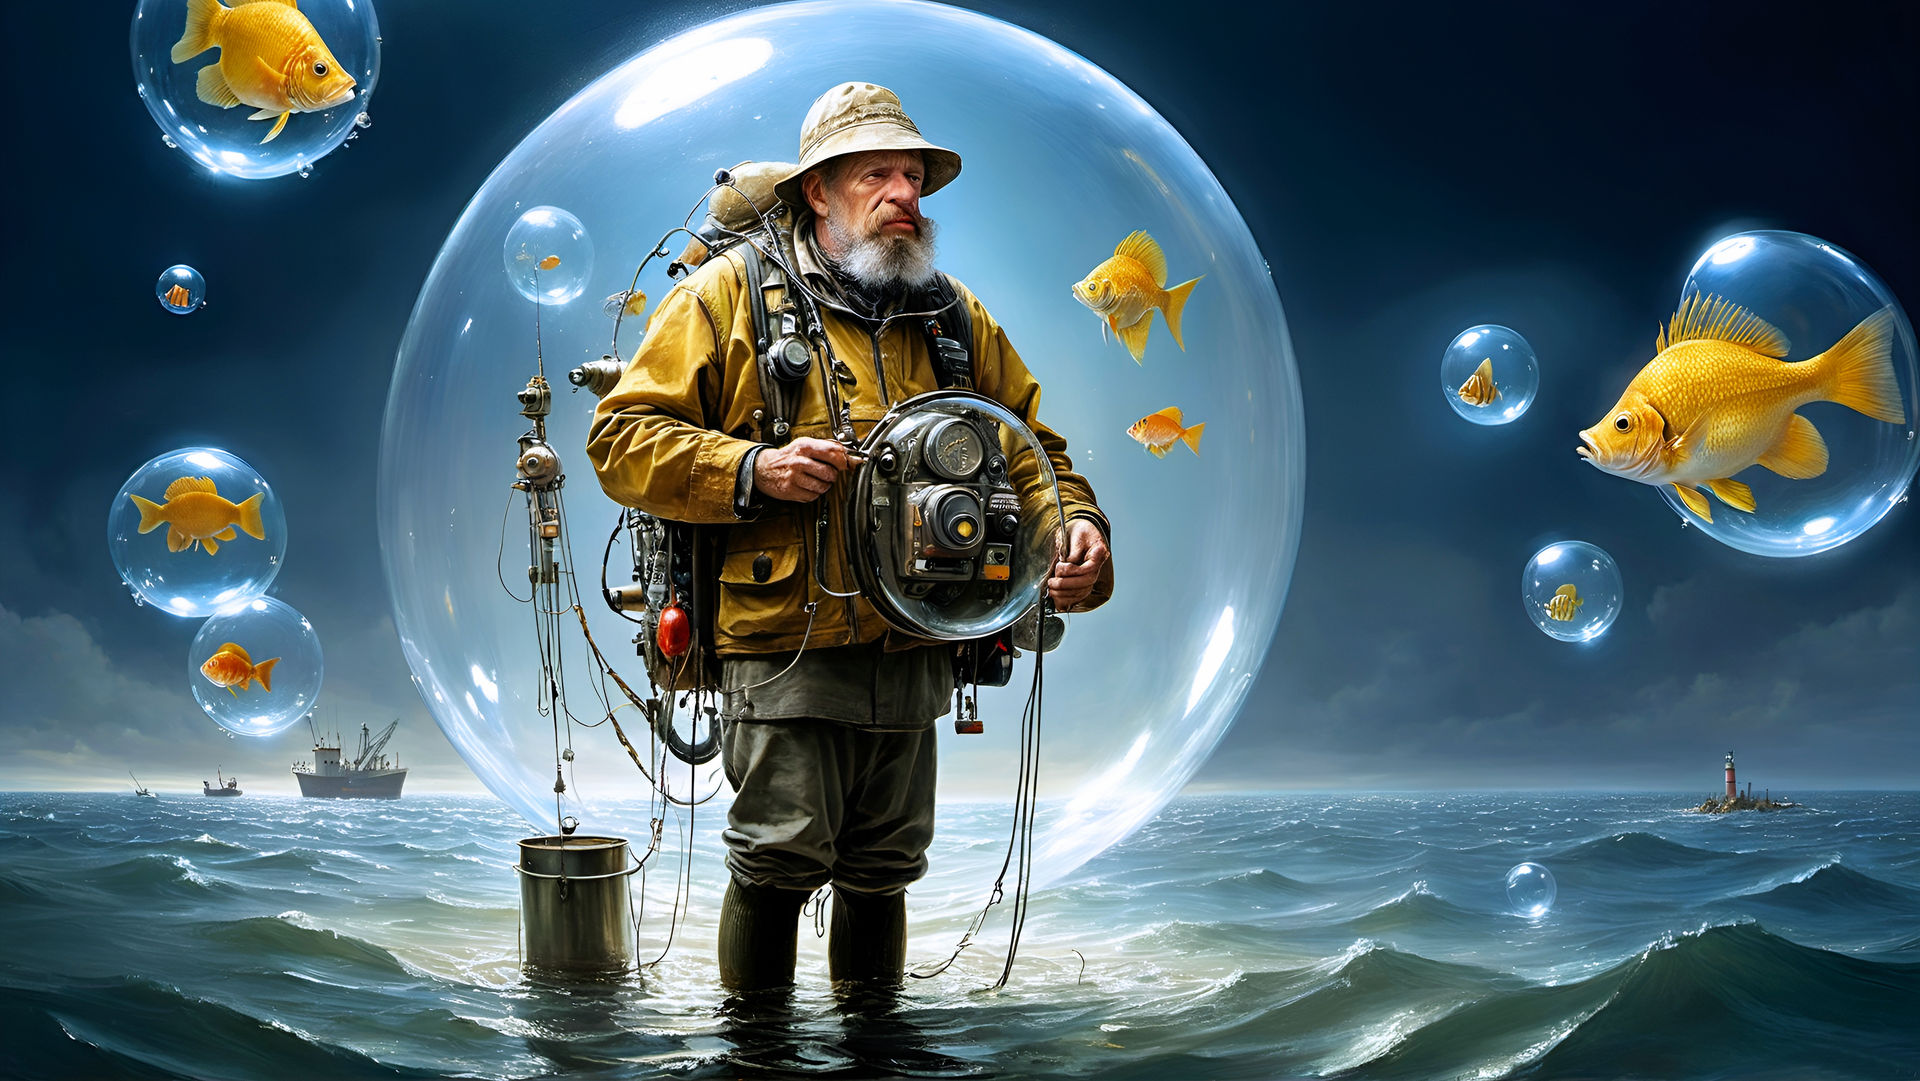 The Fisherman by AI-Postcards on DeviantArt